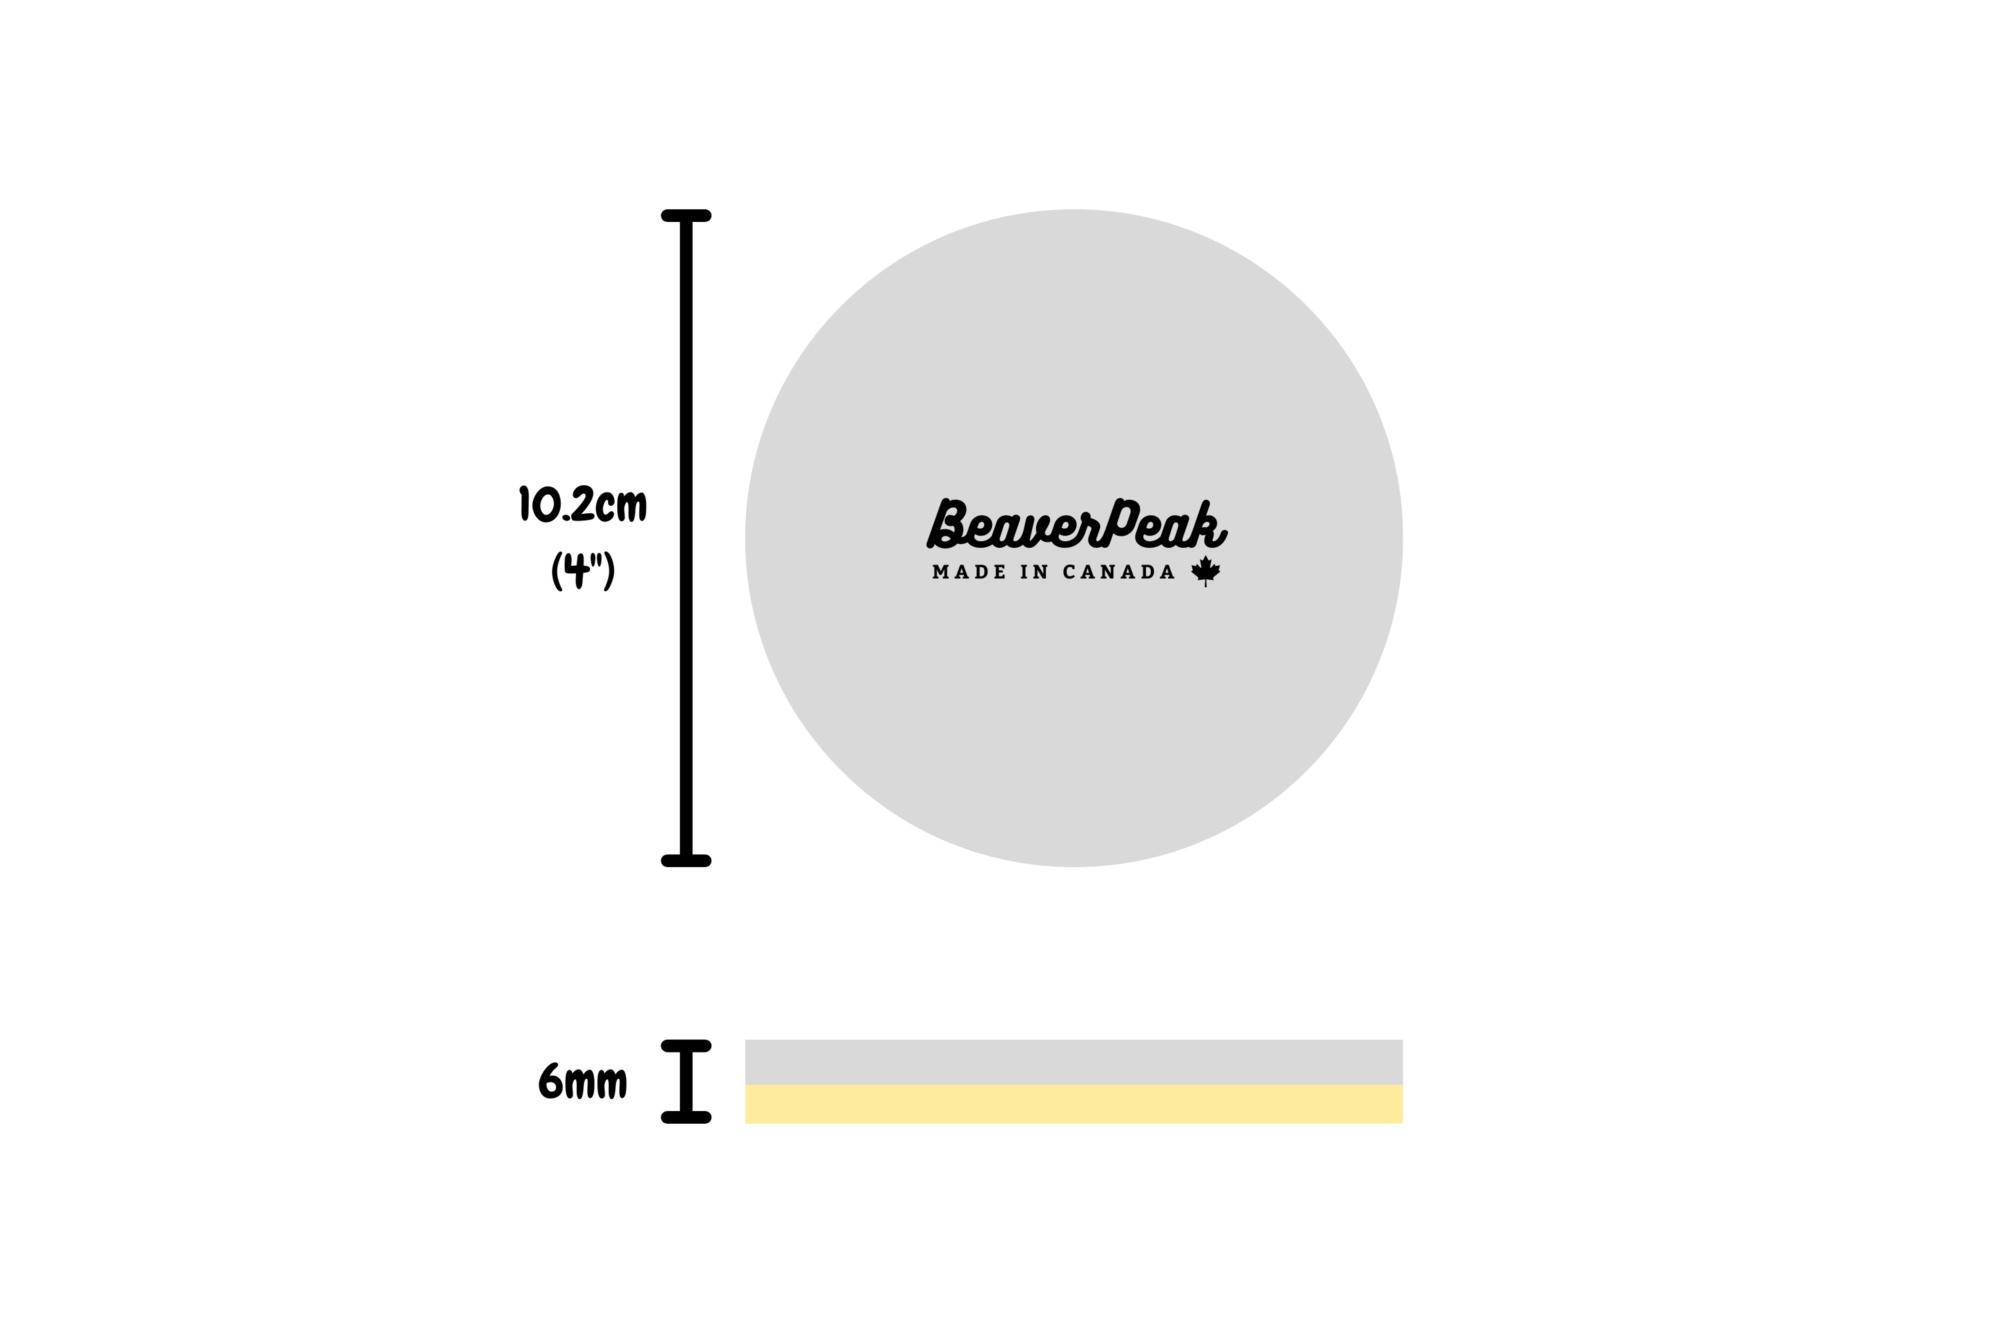 Size diagram of of our round coasters. Each coaster is a 10.2cm (4 inch) diameter circle.